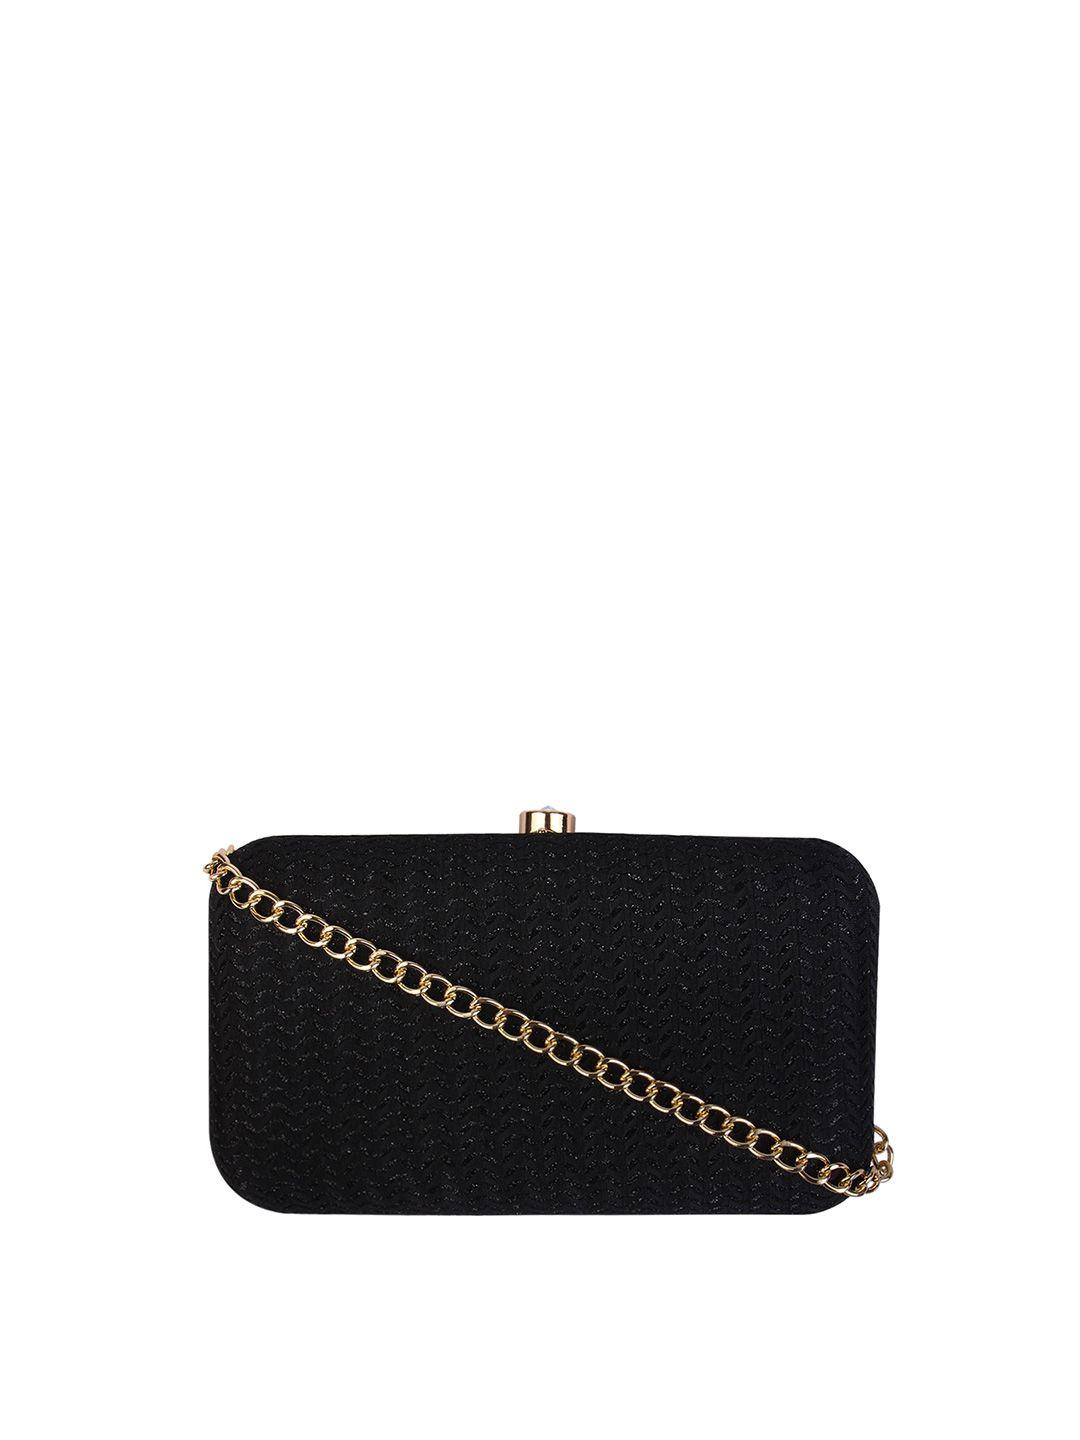 vdesi black & gold-toned  textured box clutch